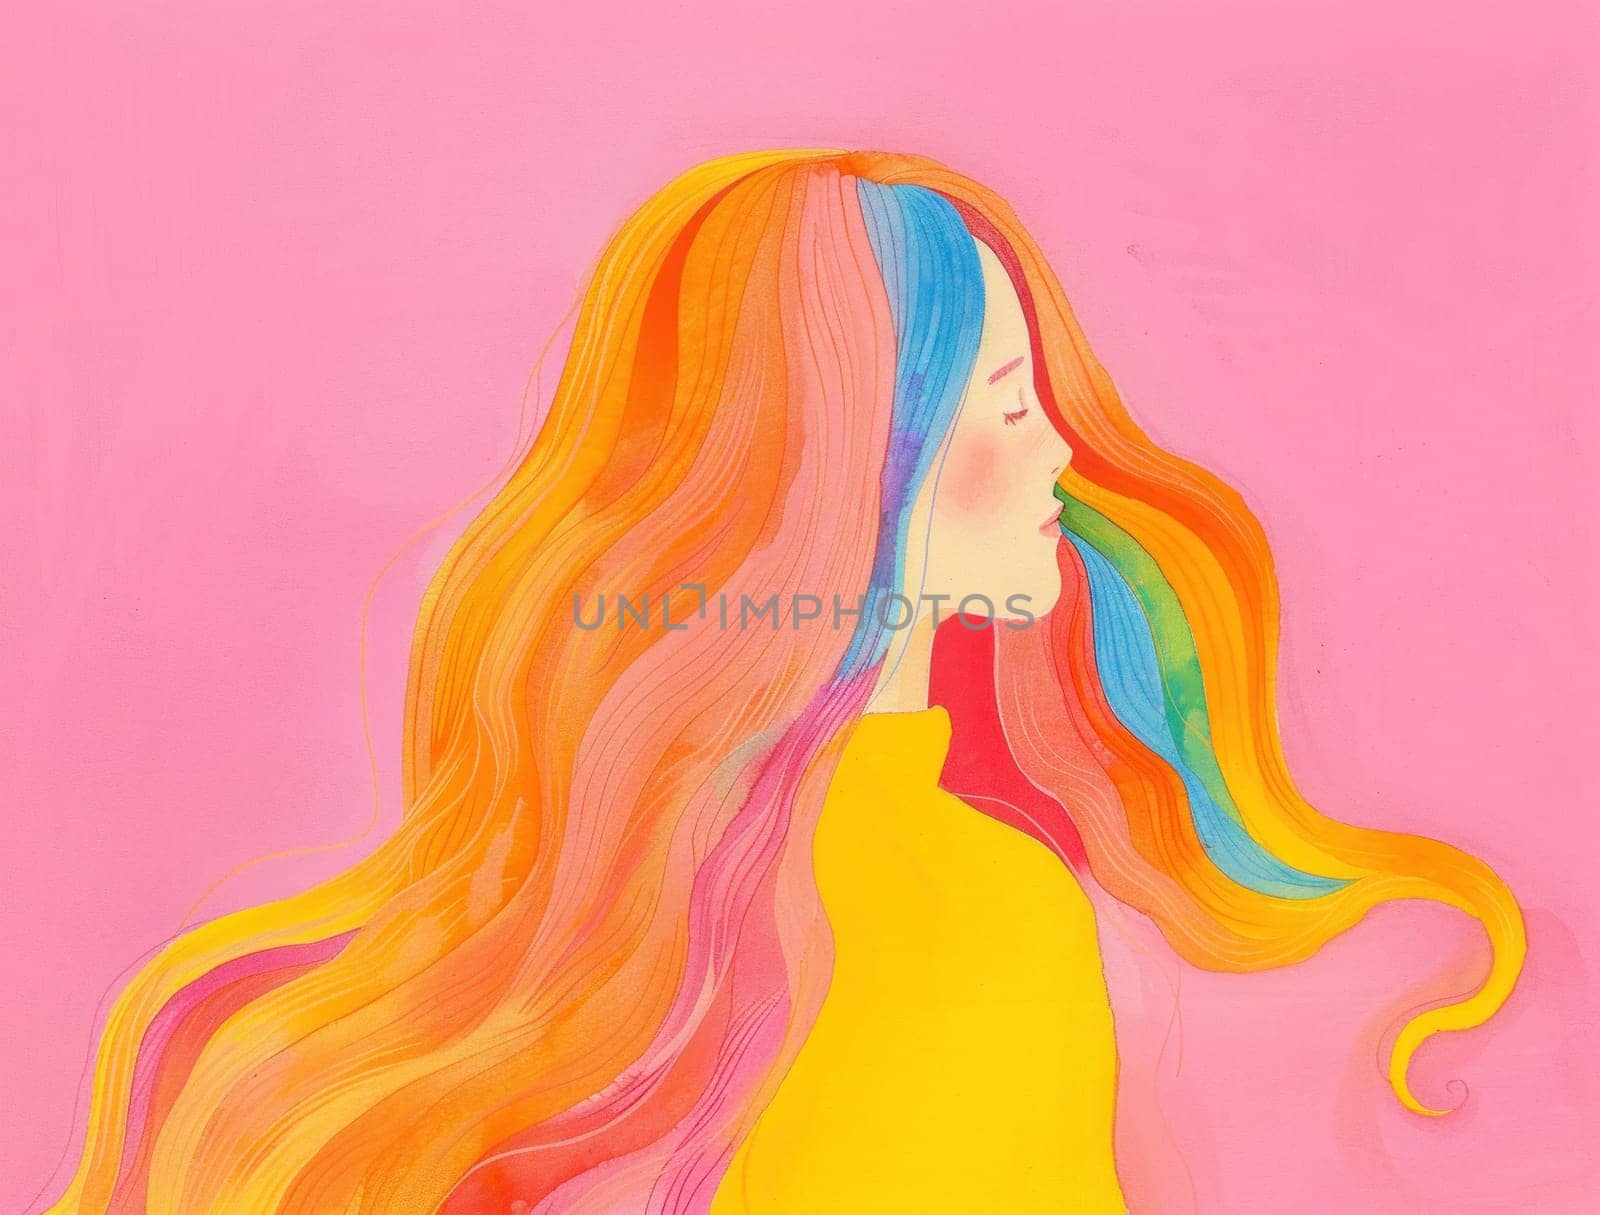 Colorful hair beauty woman portrait with rainbow hair on pink background, art and fashion concept by Vichizh